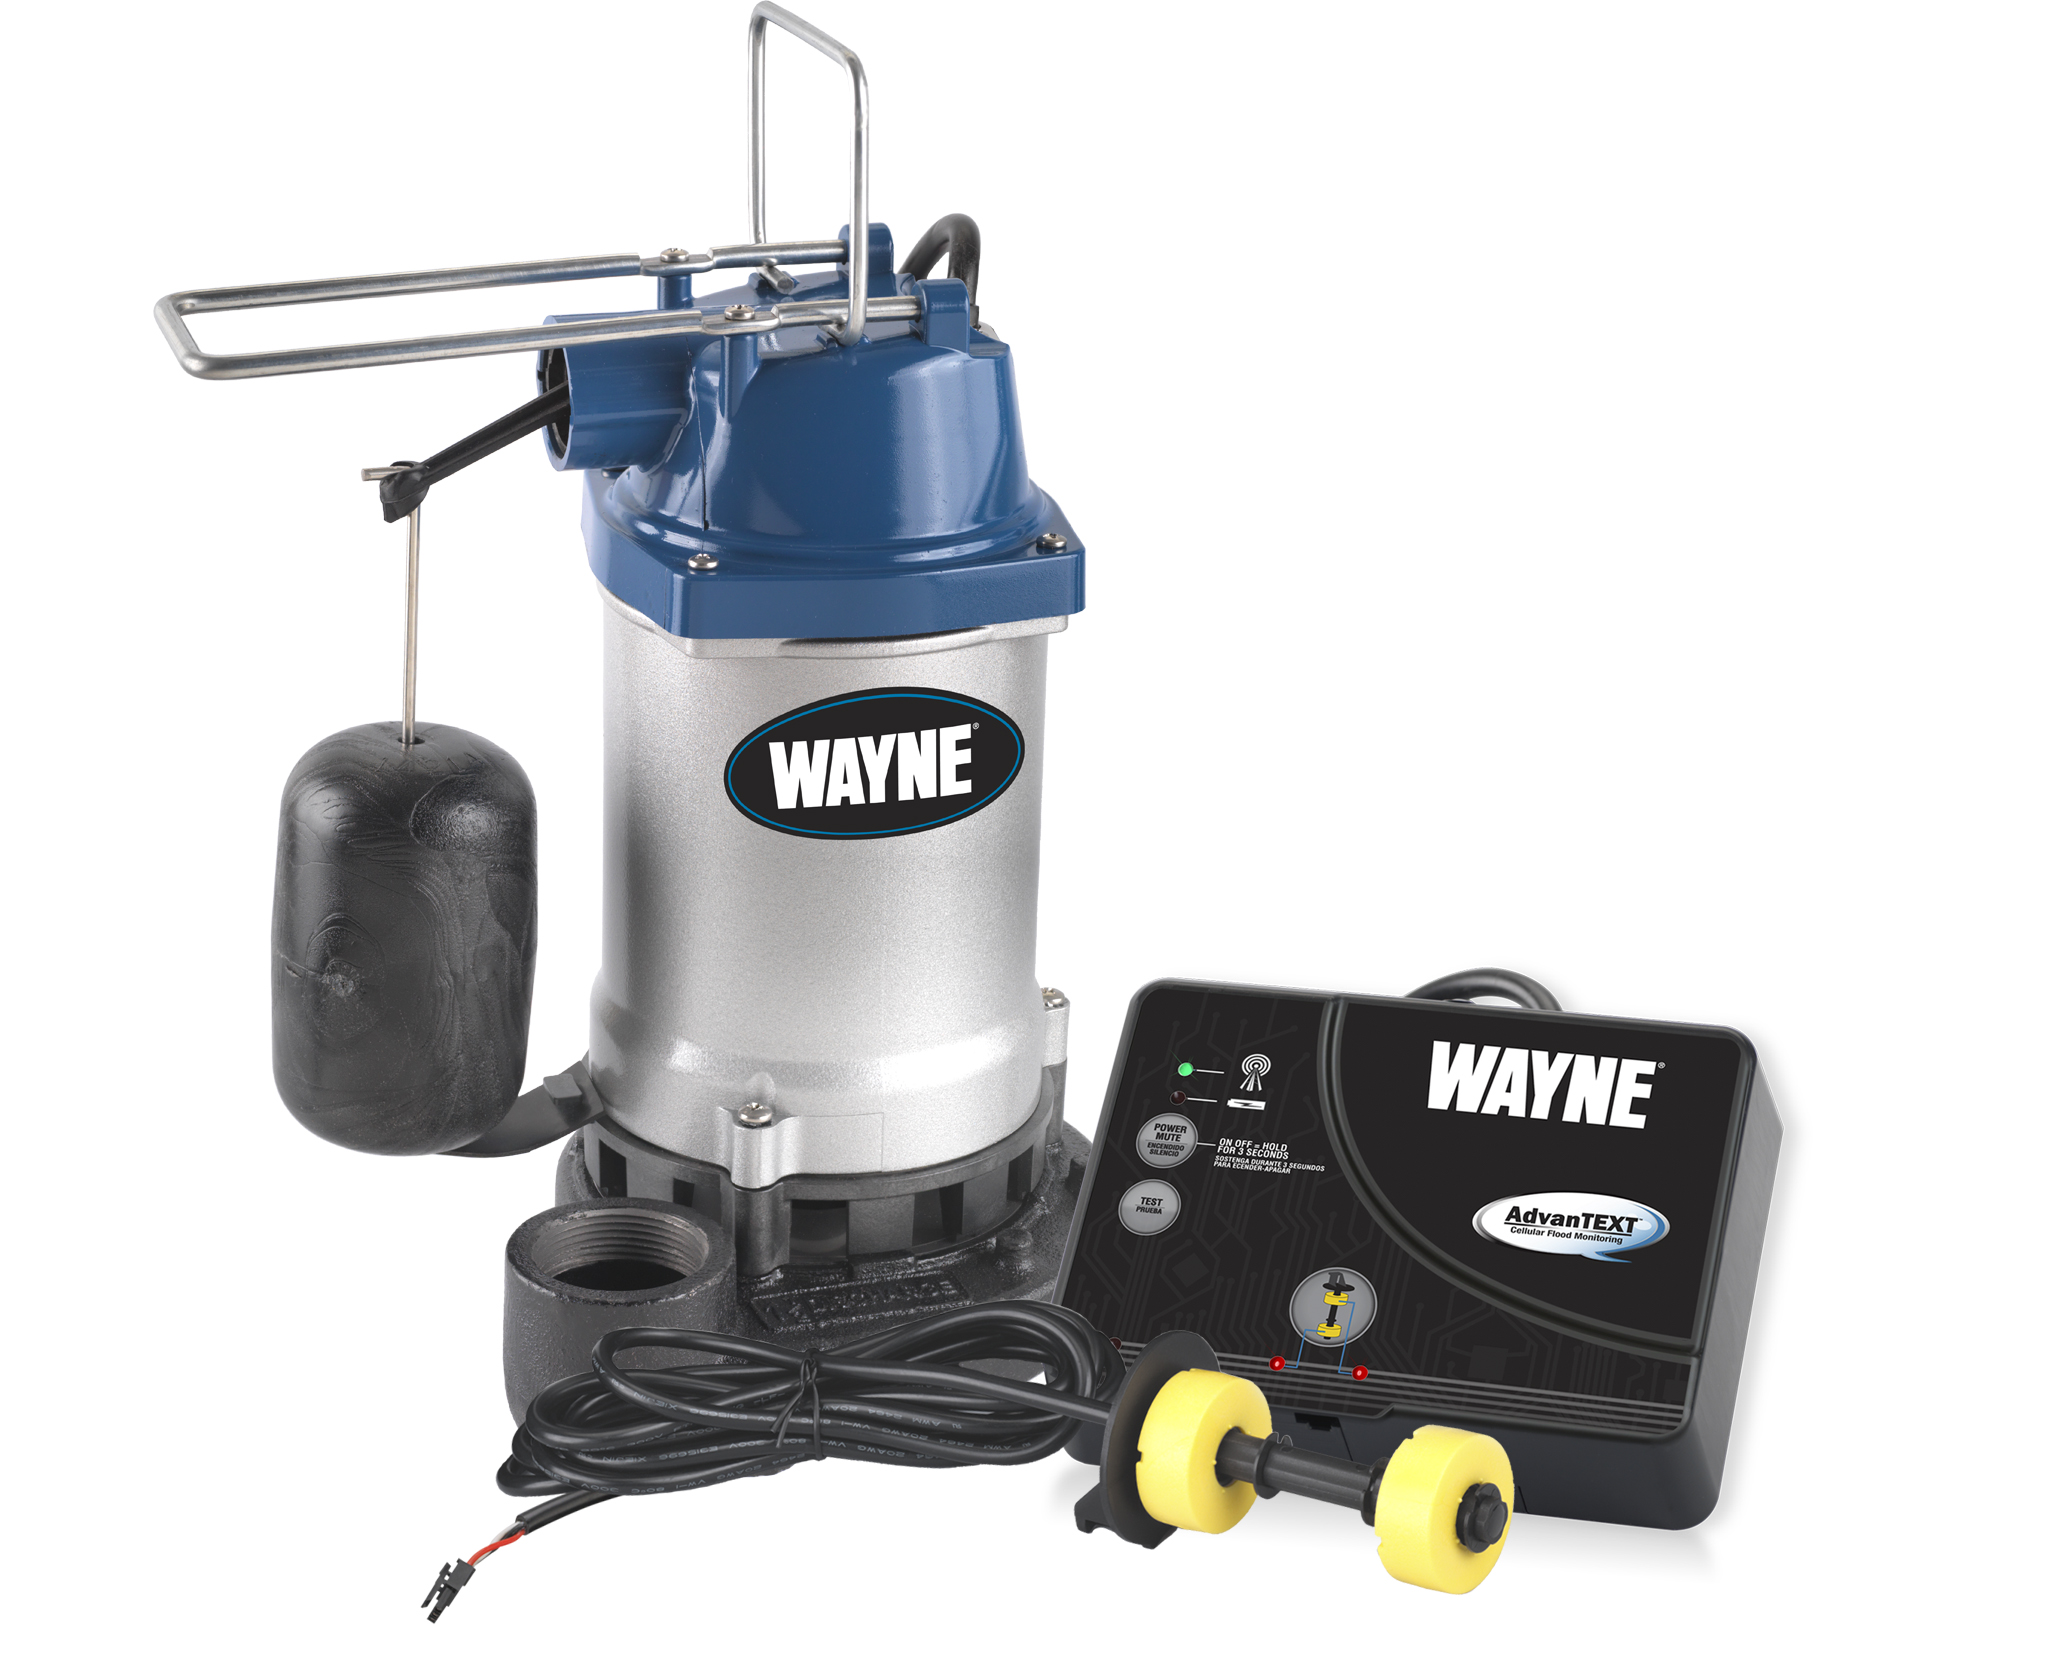 AdvanTEXT works well with a WAYNE sump pump using only one power cord.